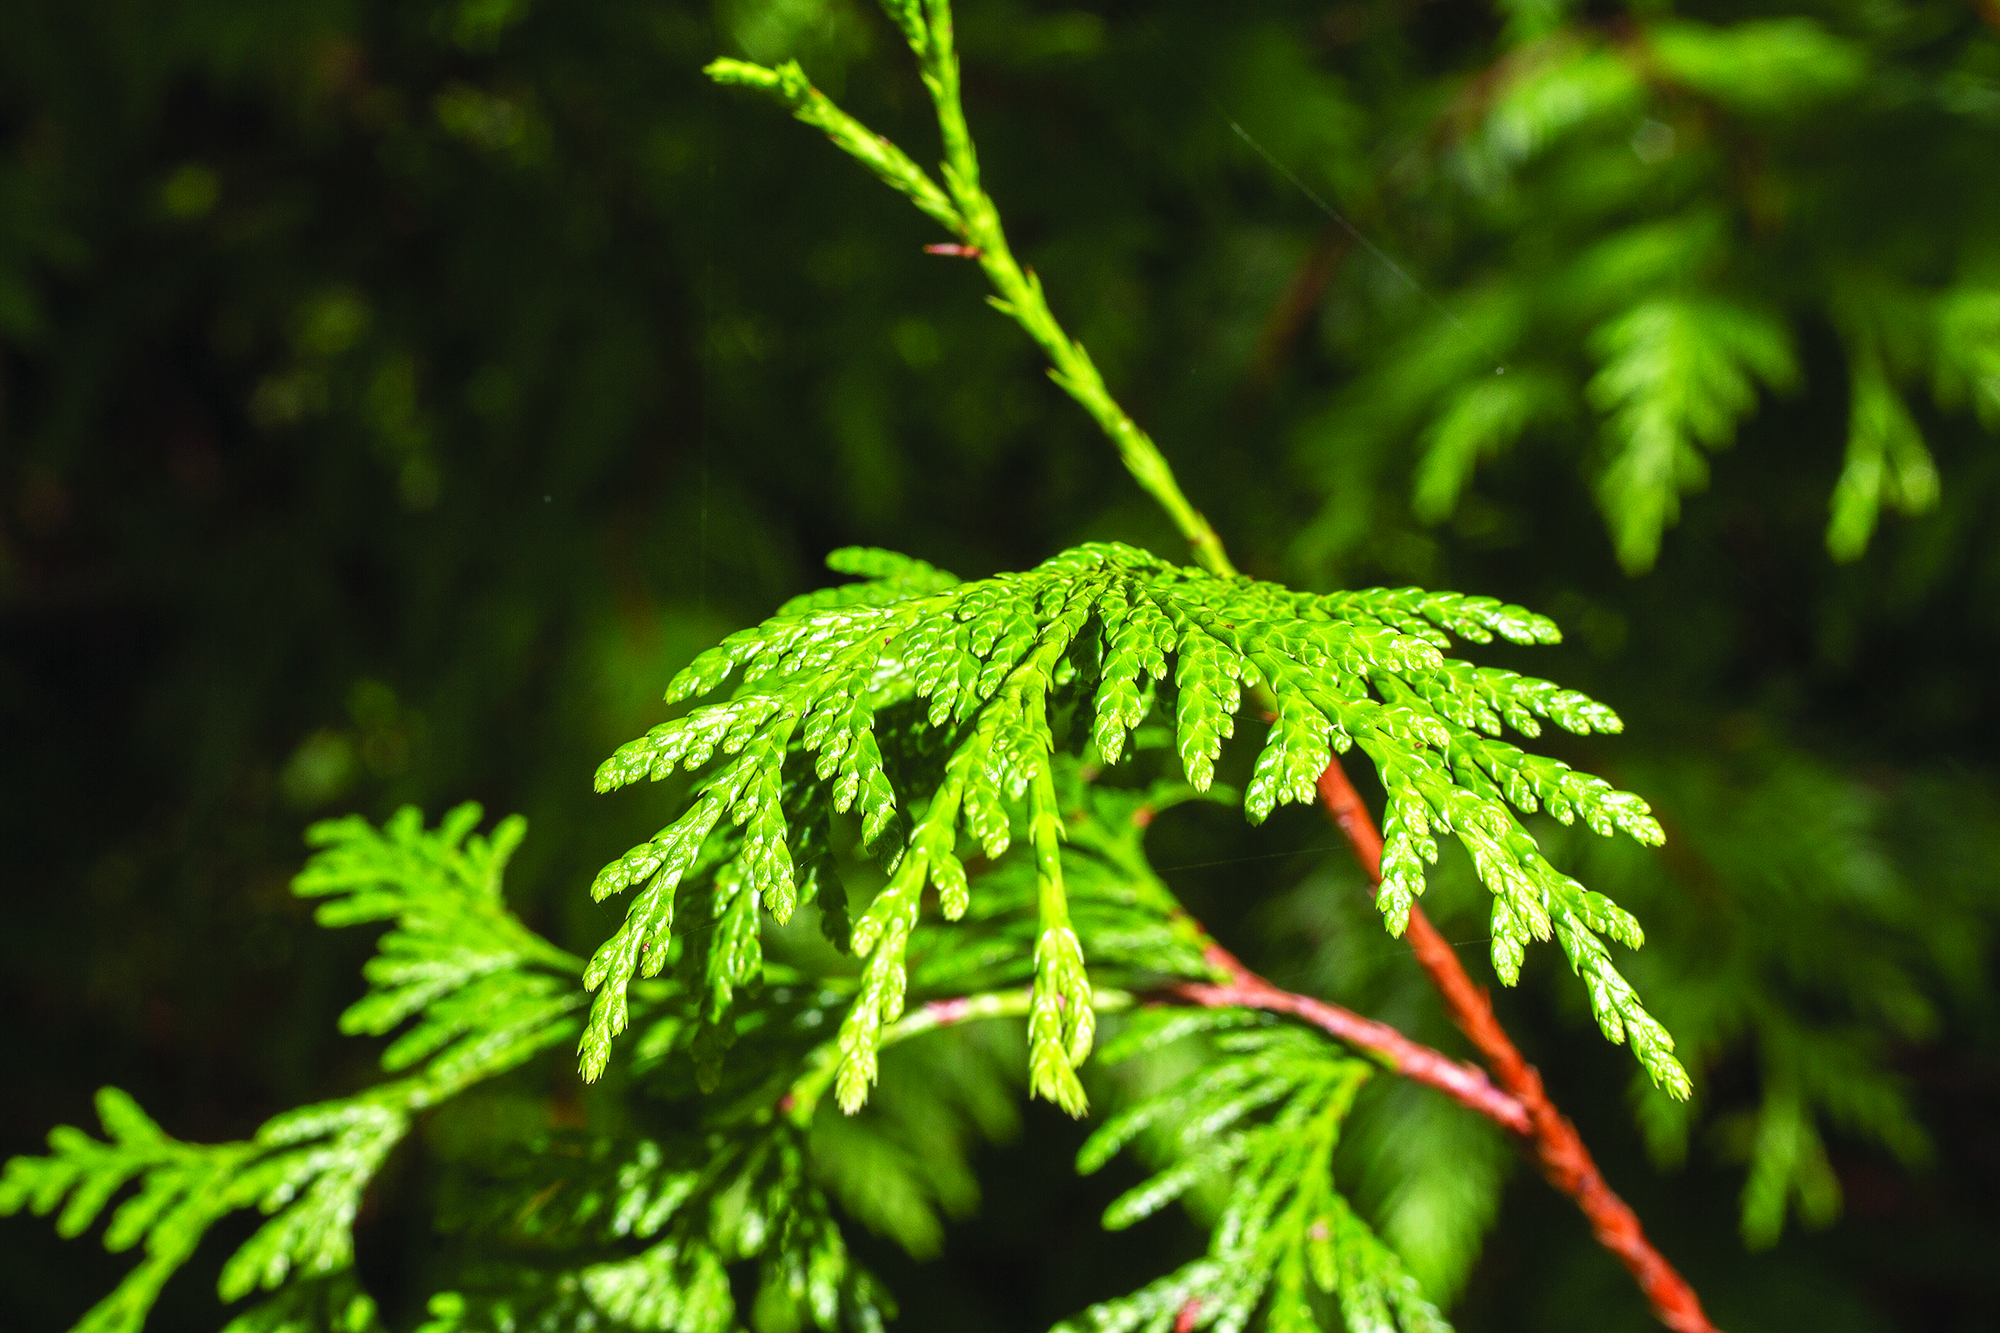 (Kyle Mittan) Bad: The cedar tree's branches, much like the hemlock's, are weak and tend to sag -- making the species a poor choice for a Christmas tree.